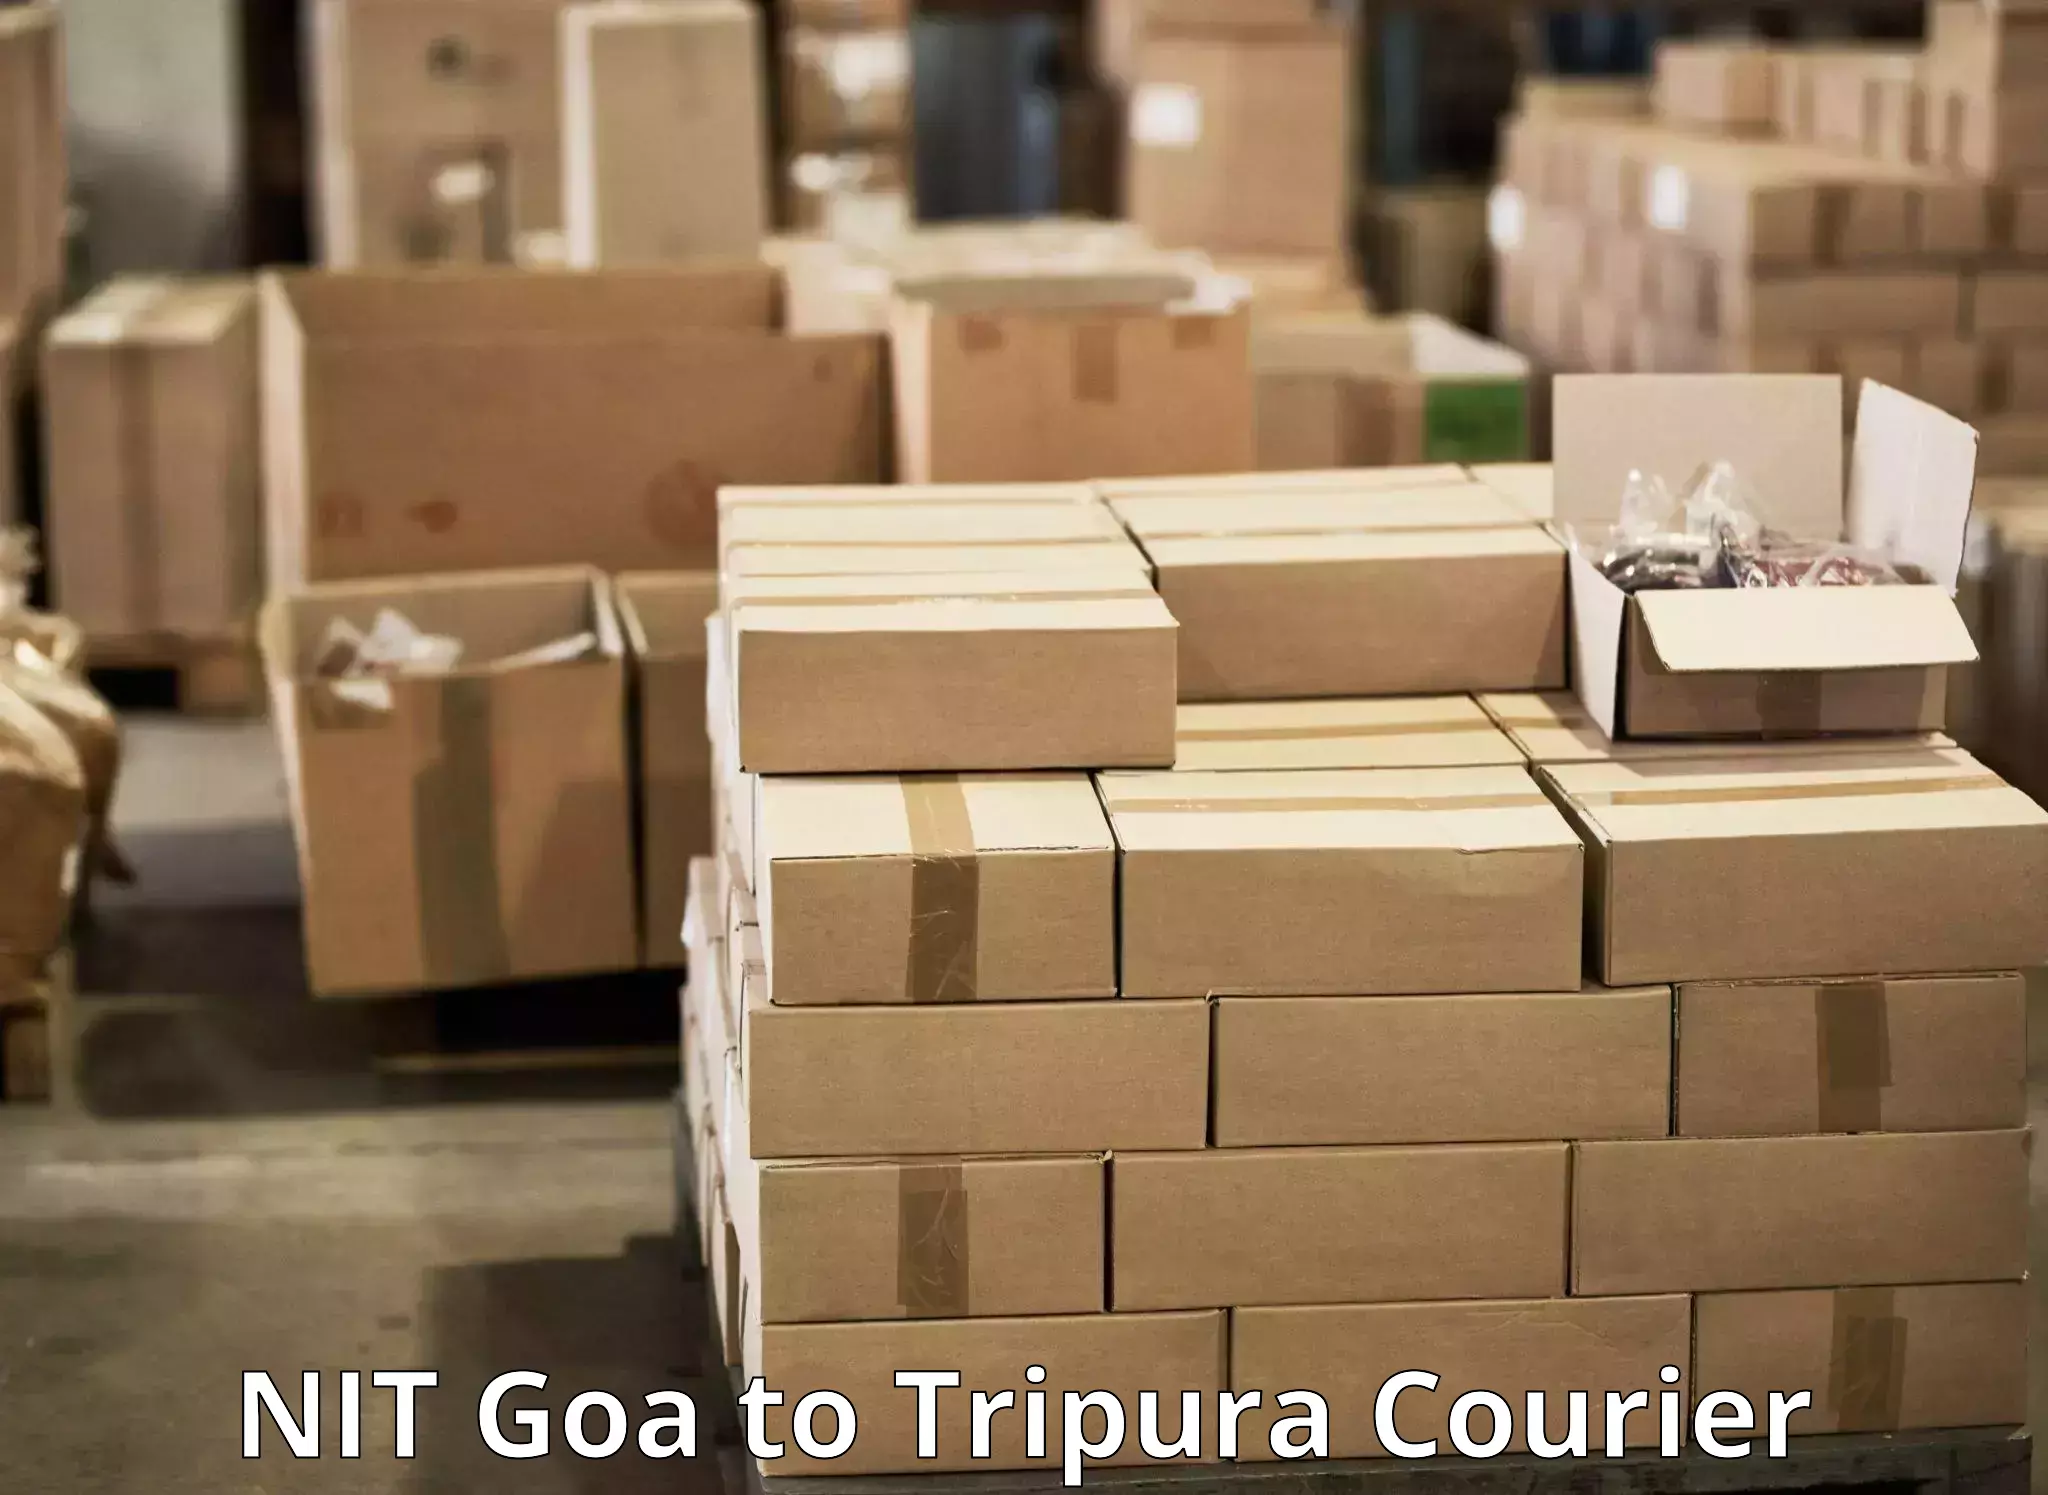 Expedited parcel delivery in NIT Goa to Agartala